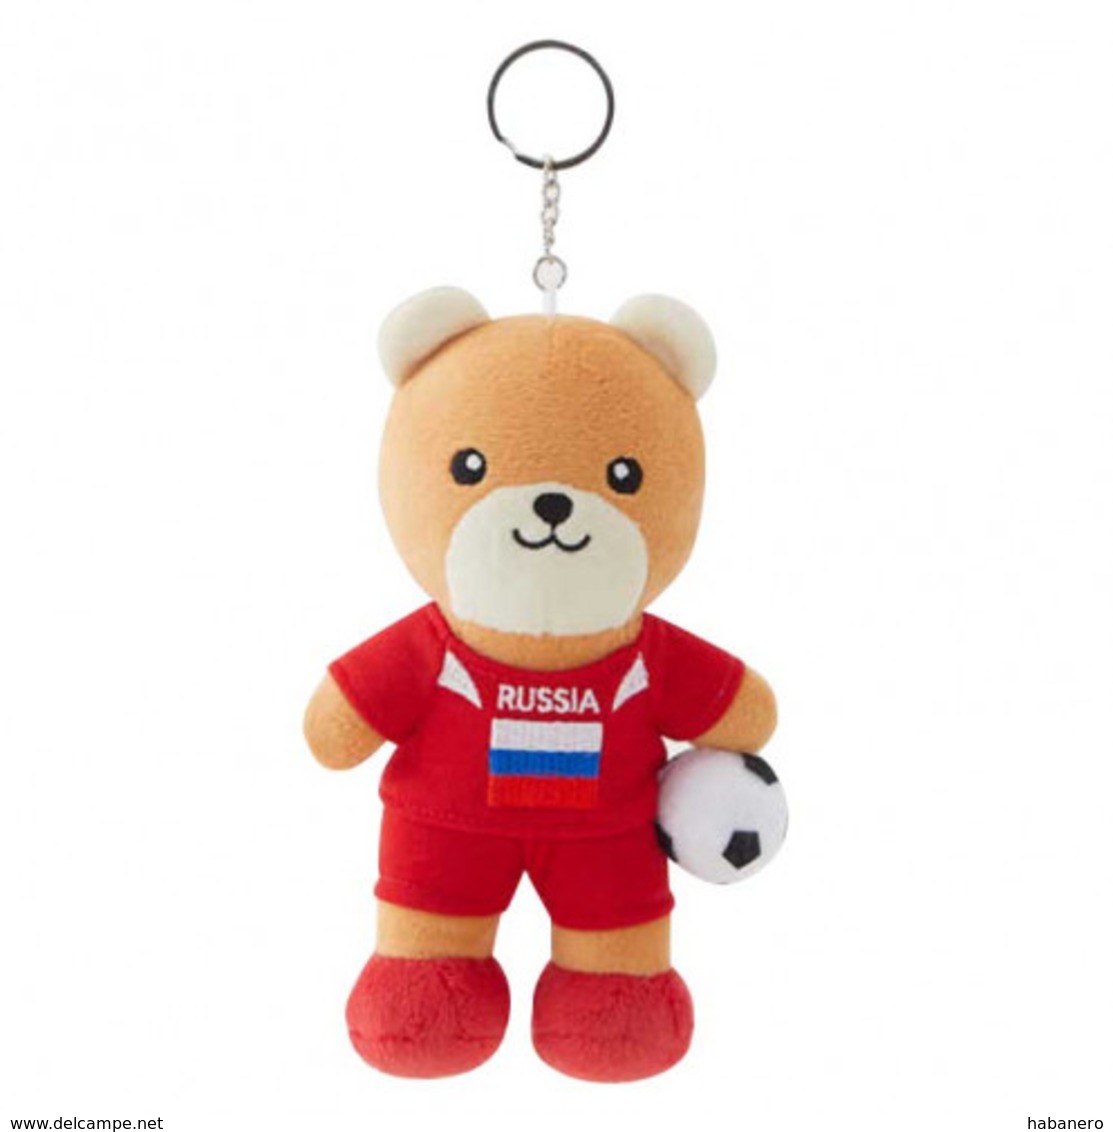 FIFA WORLD CUP 2018 COMPETE SET OF 7 PCS 17cm SOFT TEDDYBEAR MASCOT WITH KEY-RING - BIG C THAILAND LIMITED ISSUE